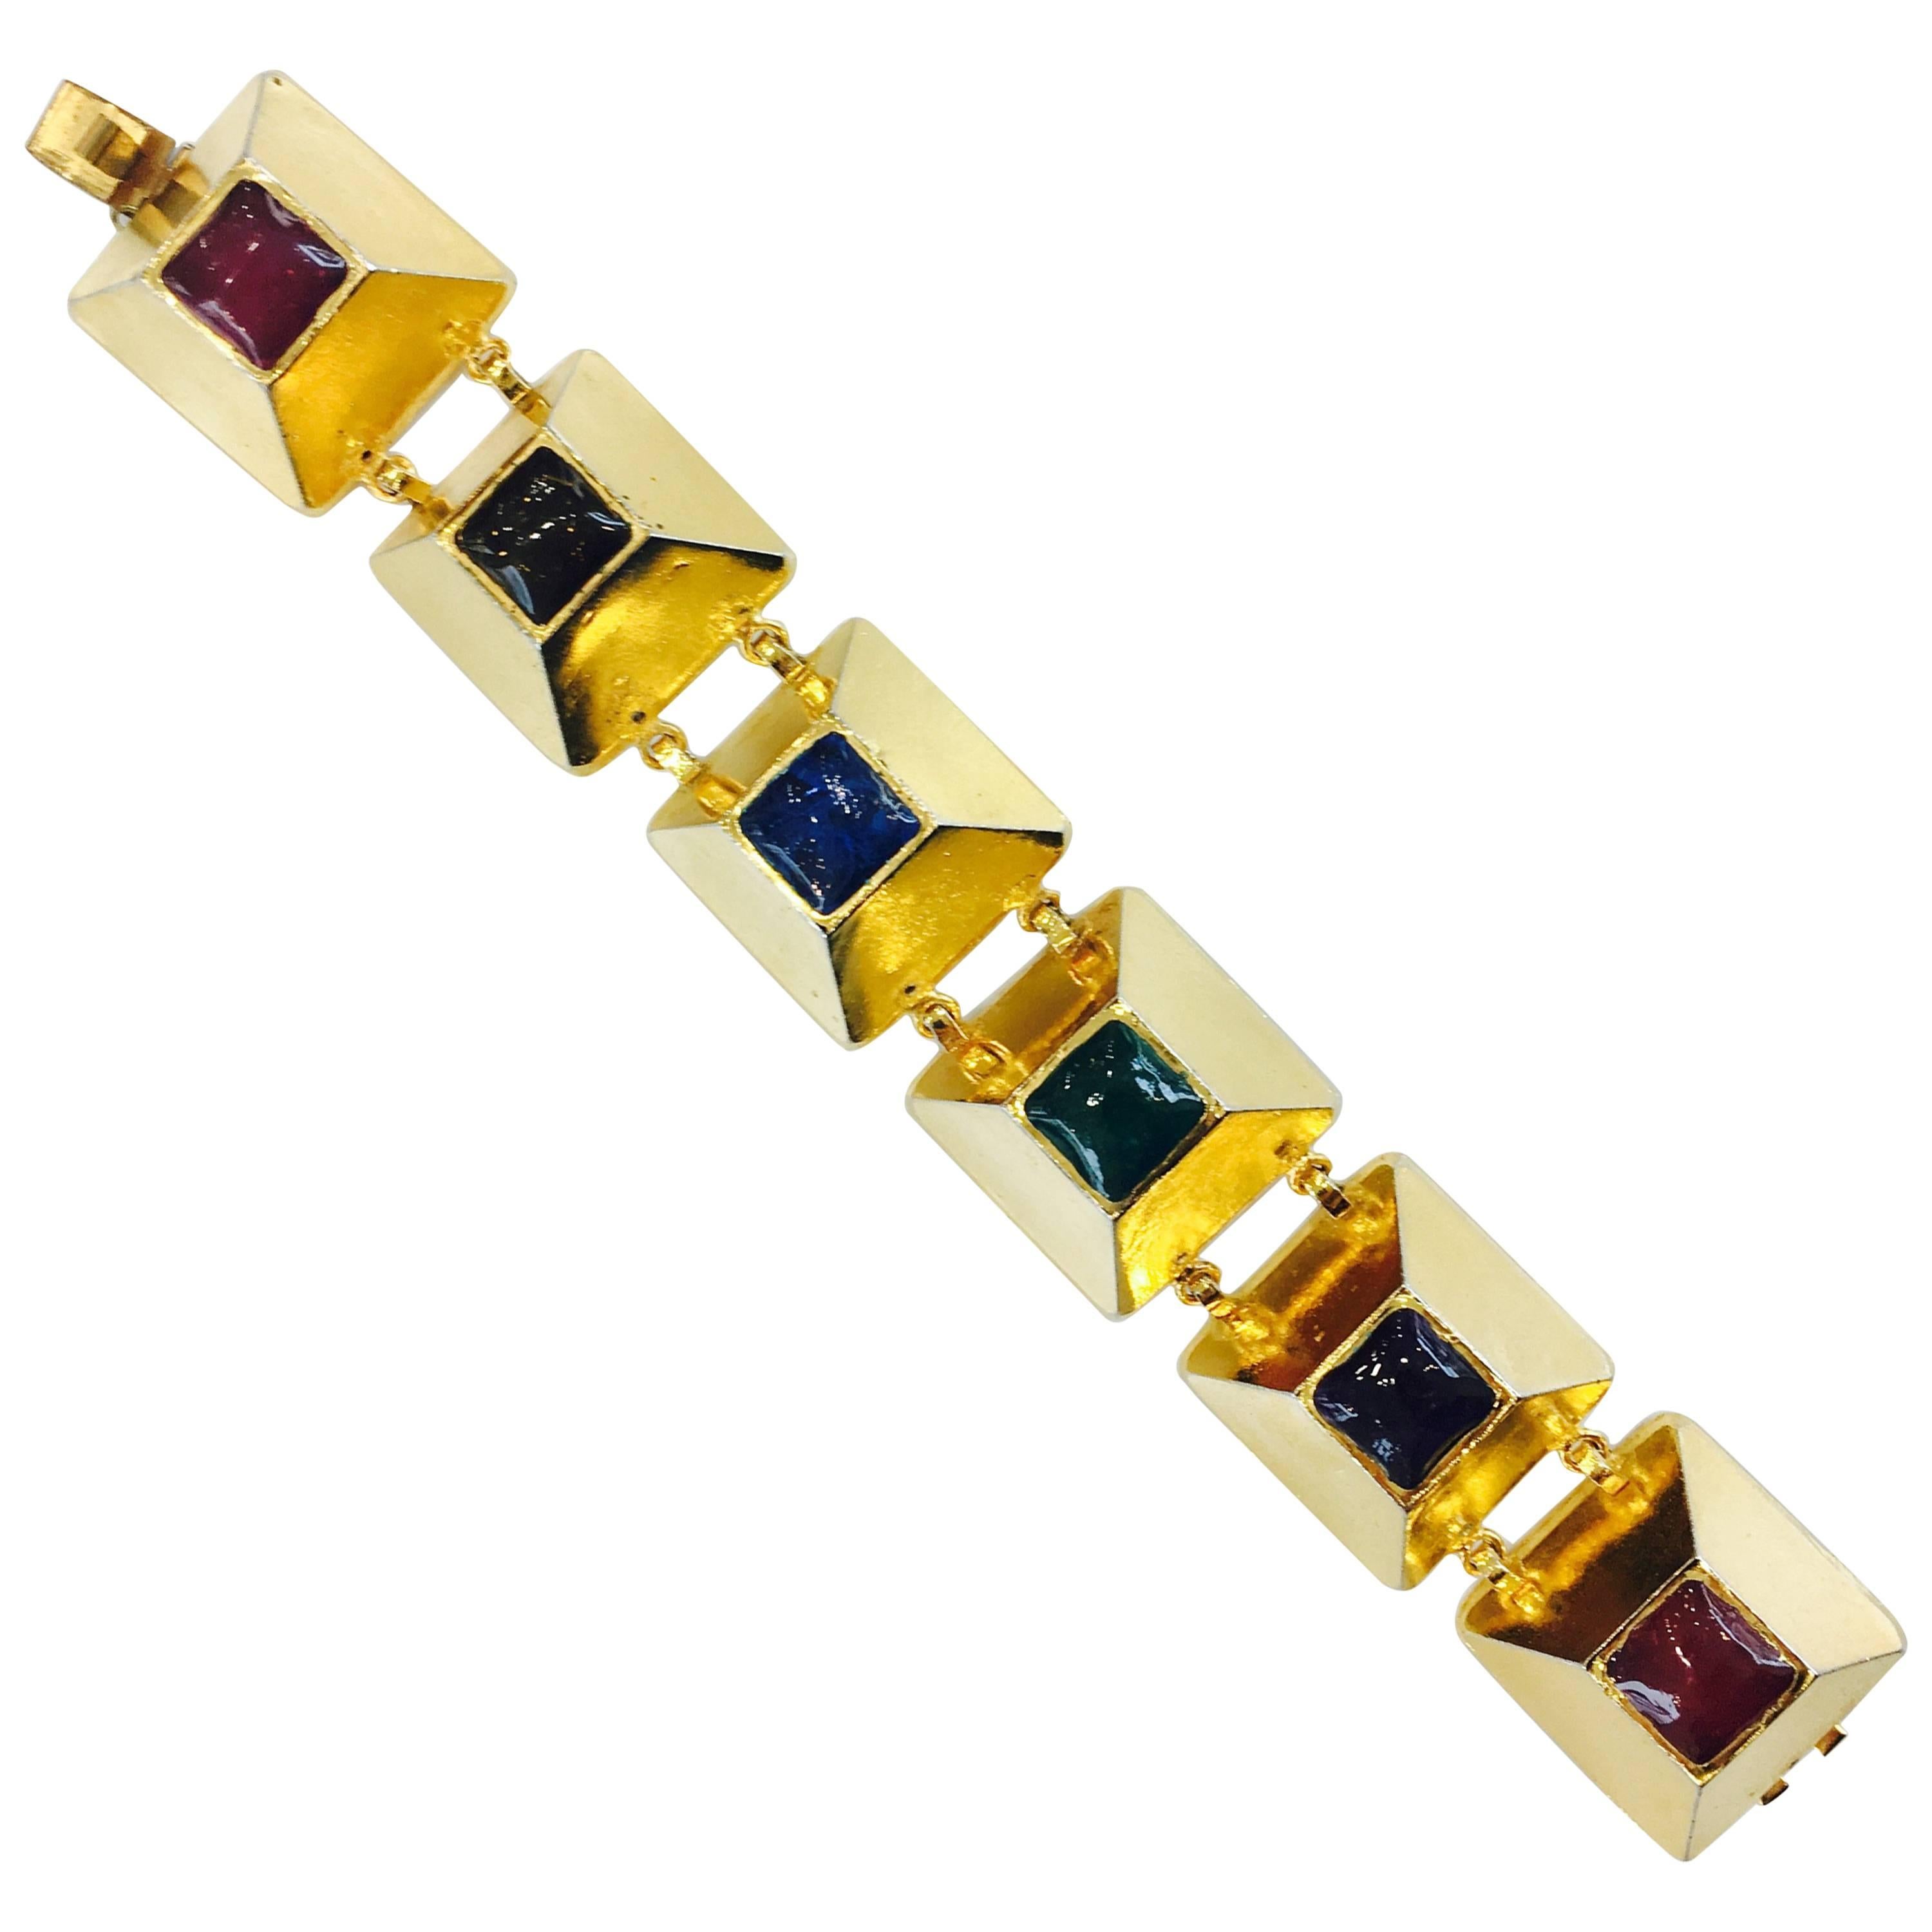 1977 Gold Plated Chanel Bracelet with Coloured Resins